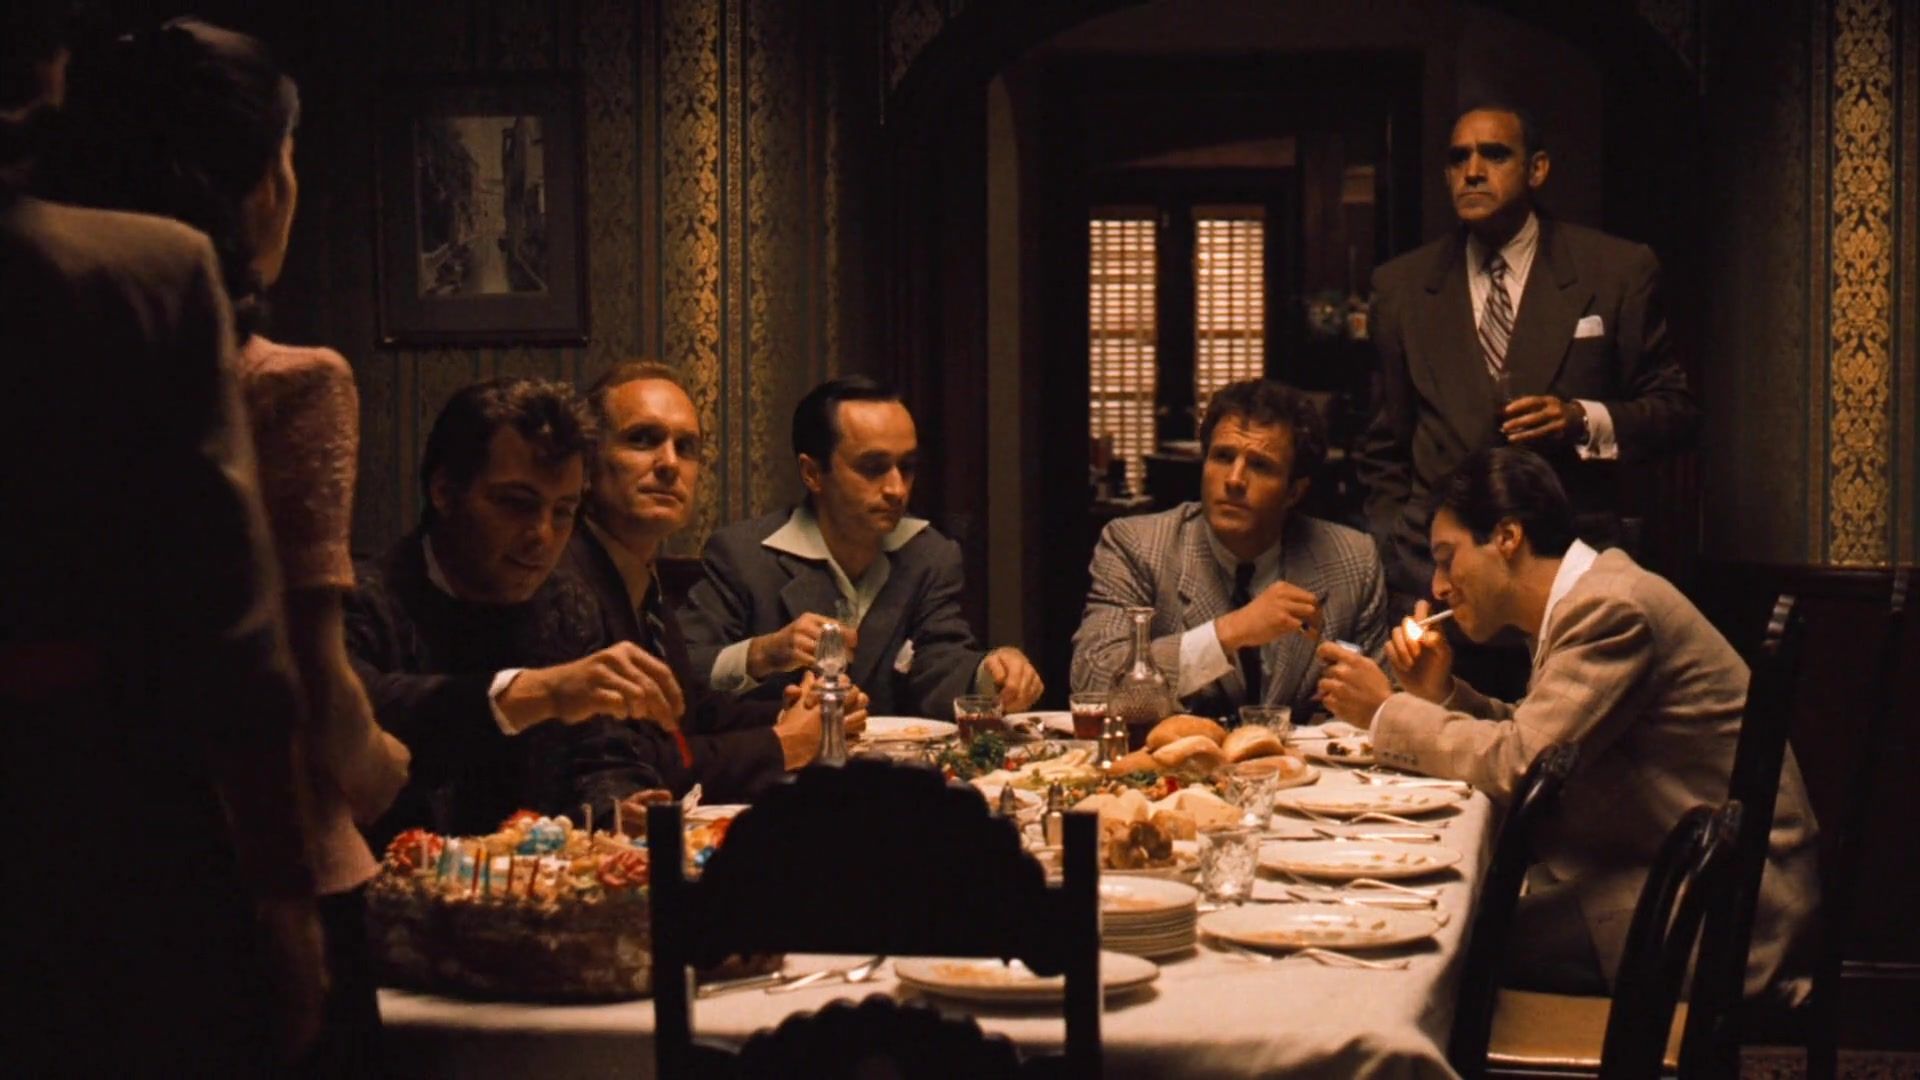 Dinner & Movie: The Godfather and family, food and wine